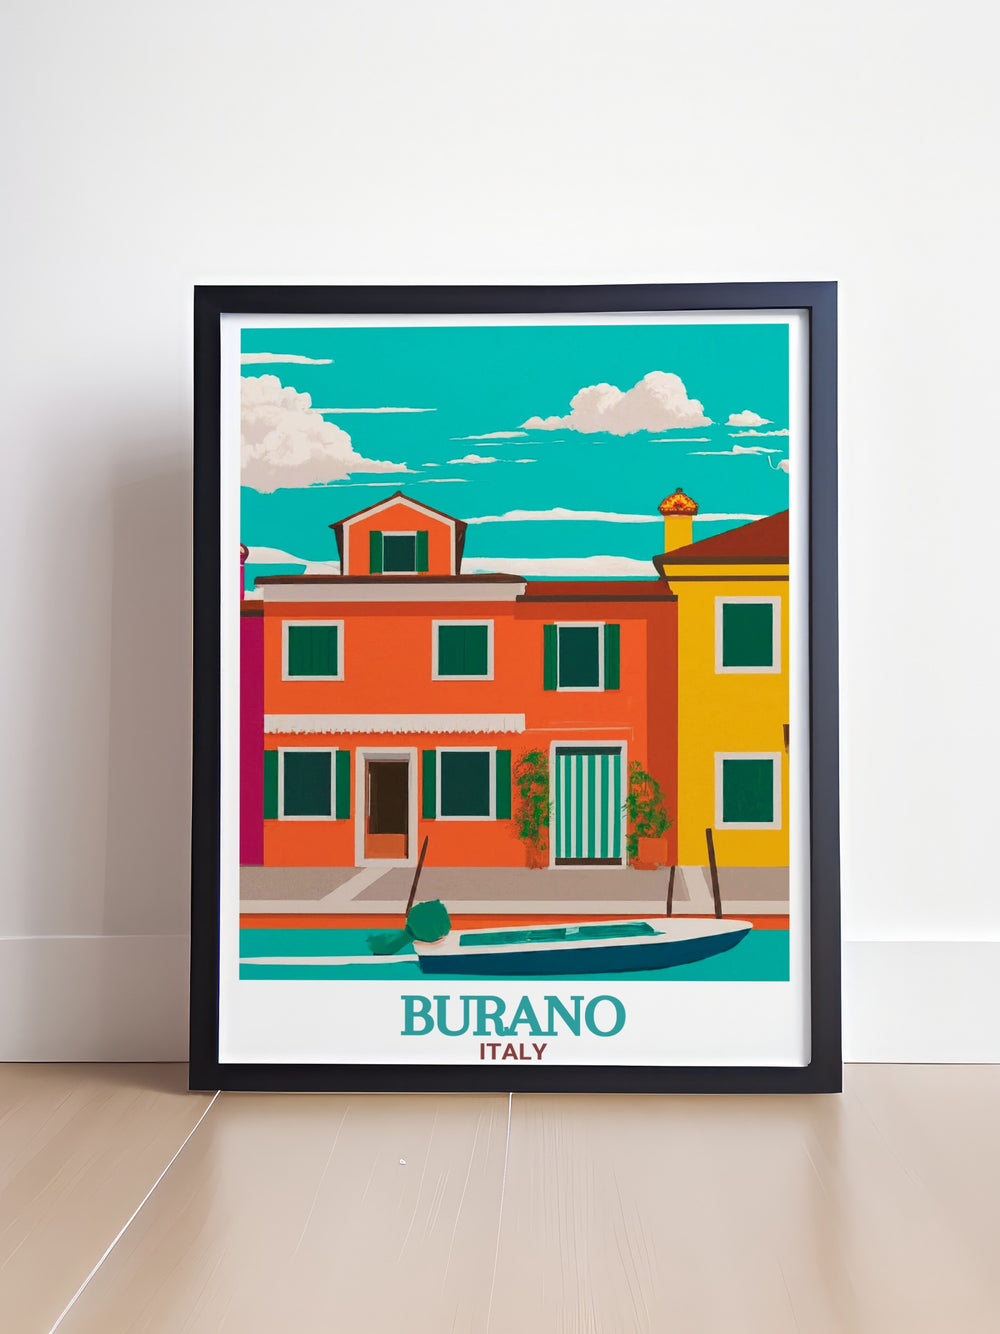 Detailed Burano skyline showcasing the colorful houses and tranquil waterways of Burano. This Burano print makes a stunning addition to any wall art collection, bringing a vibrant and cheerful ambiance to your living space.